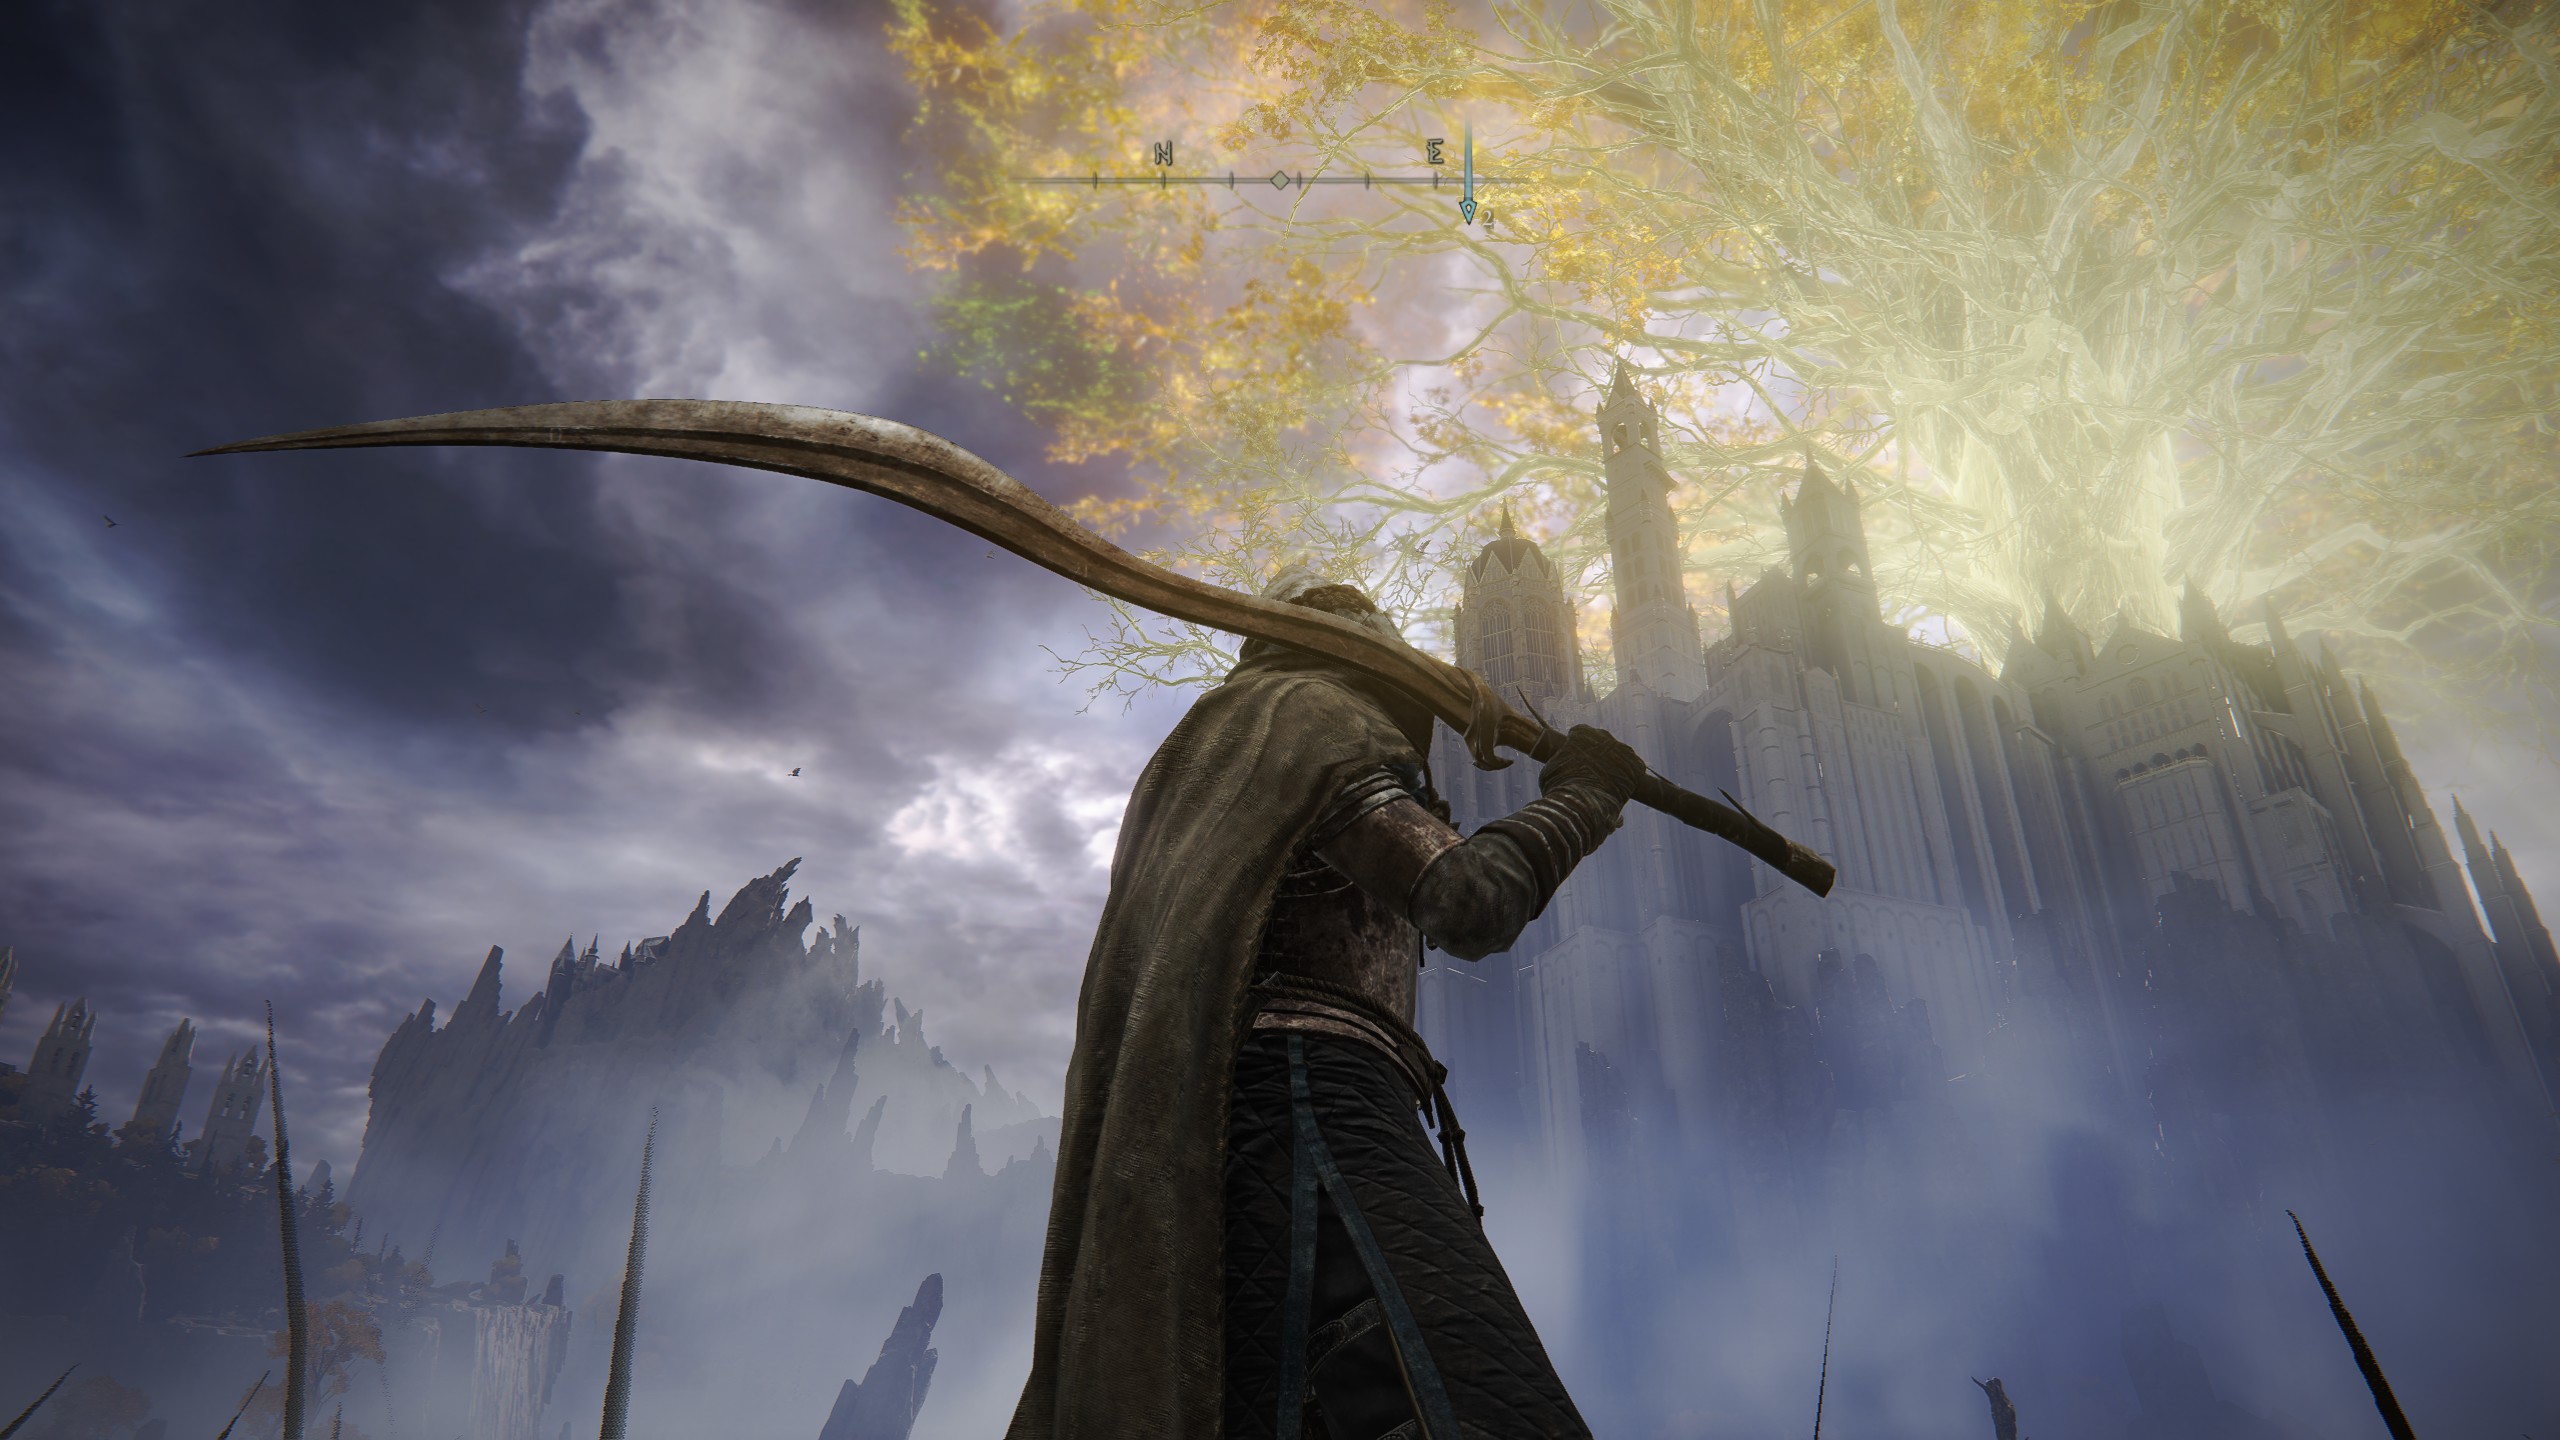 Elden Ring review: Come see the softer side of punishing difficulty